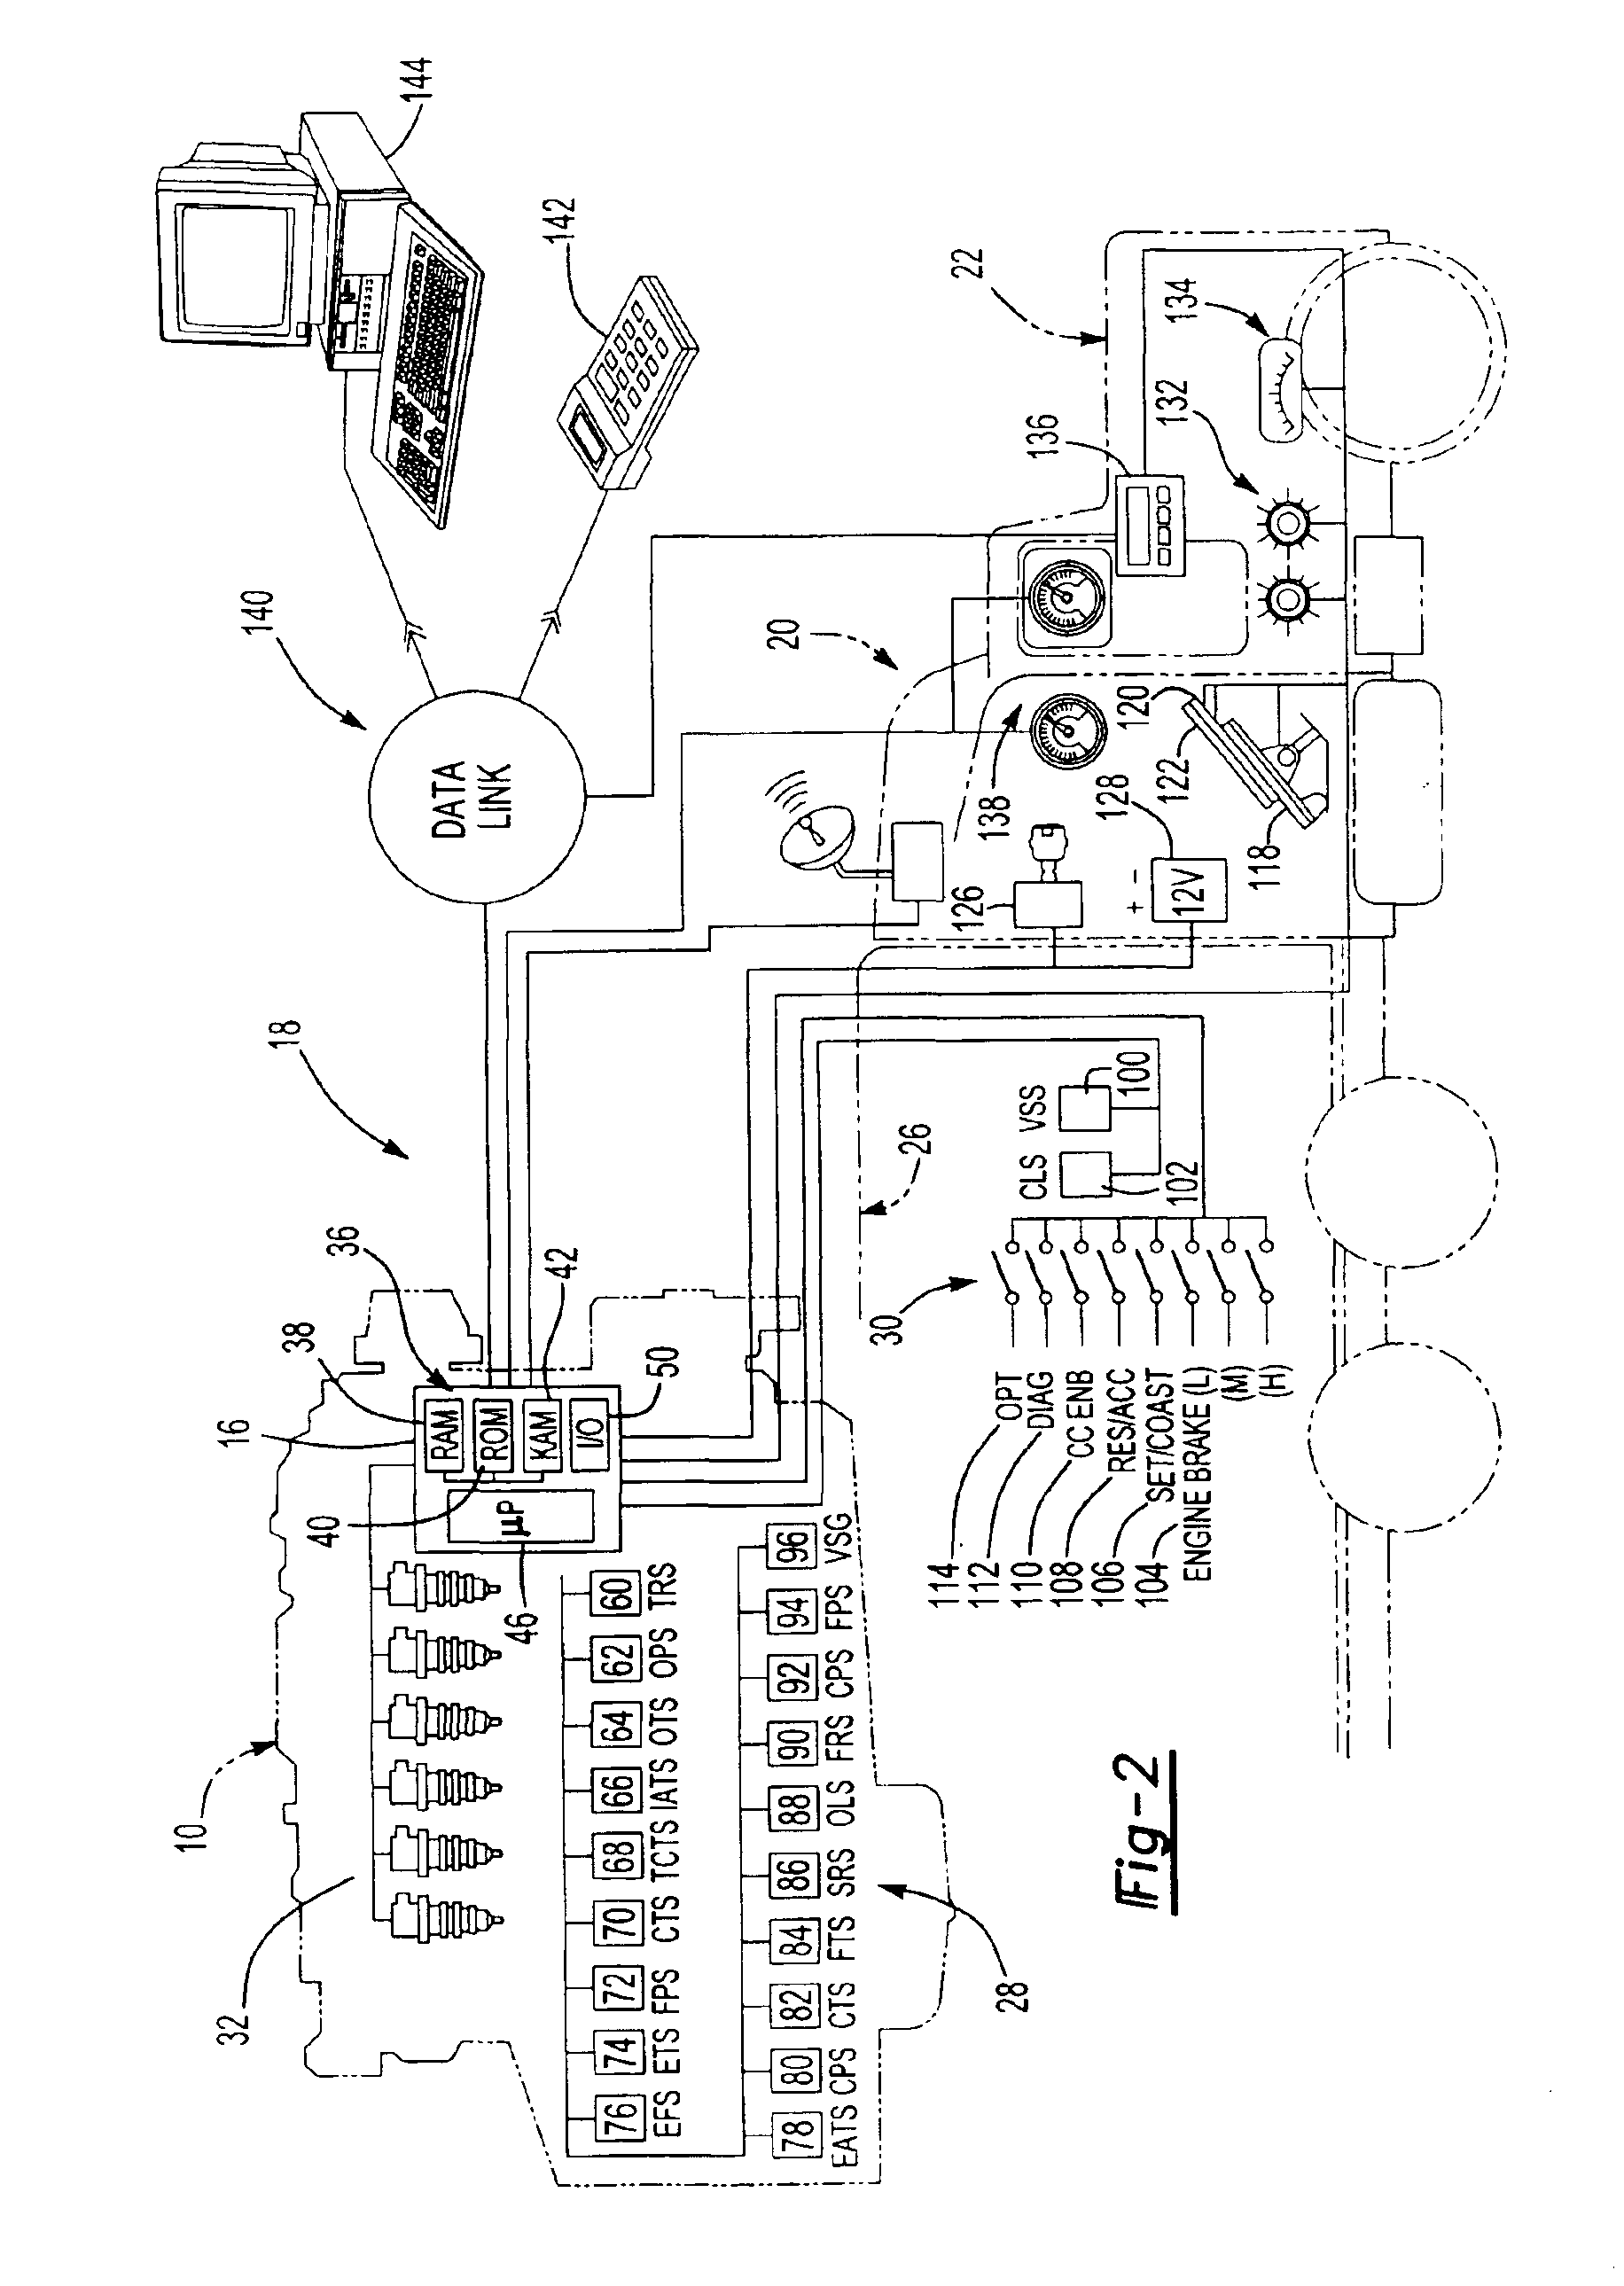 Method and system for controlling engine temperature by engine derating